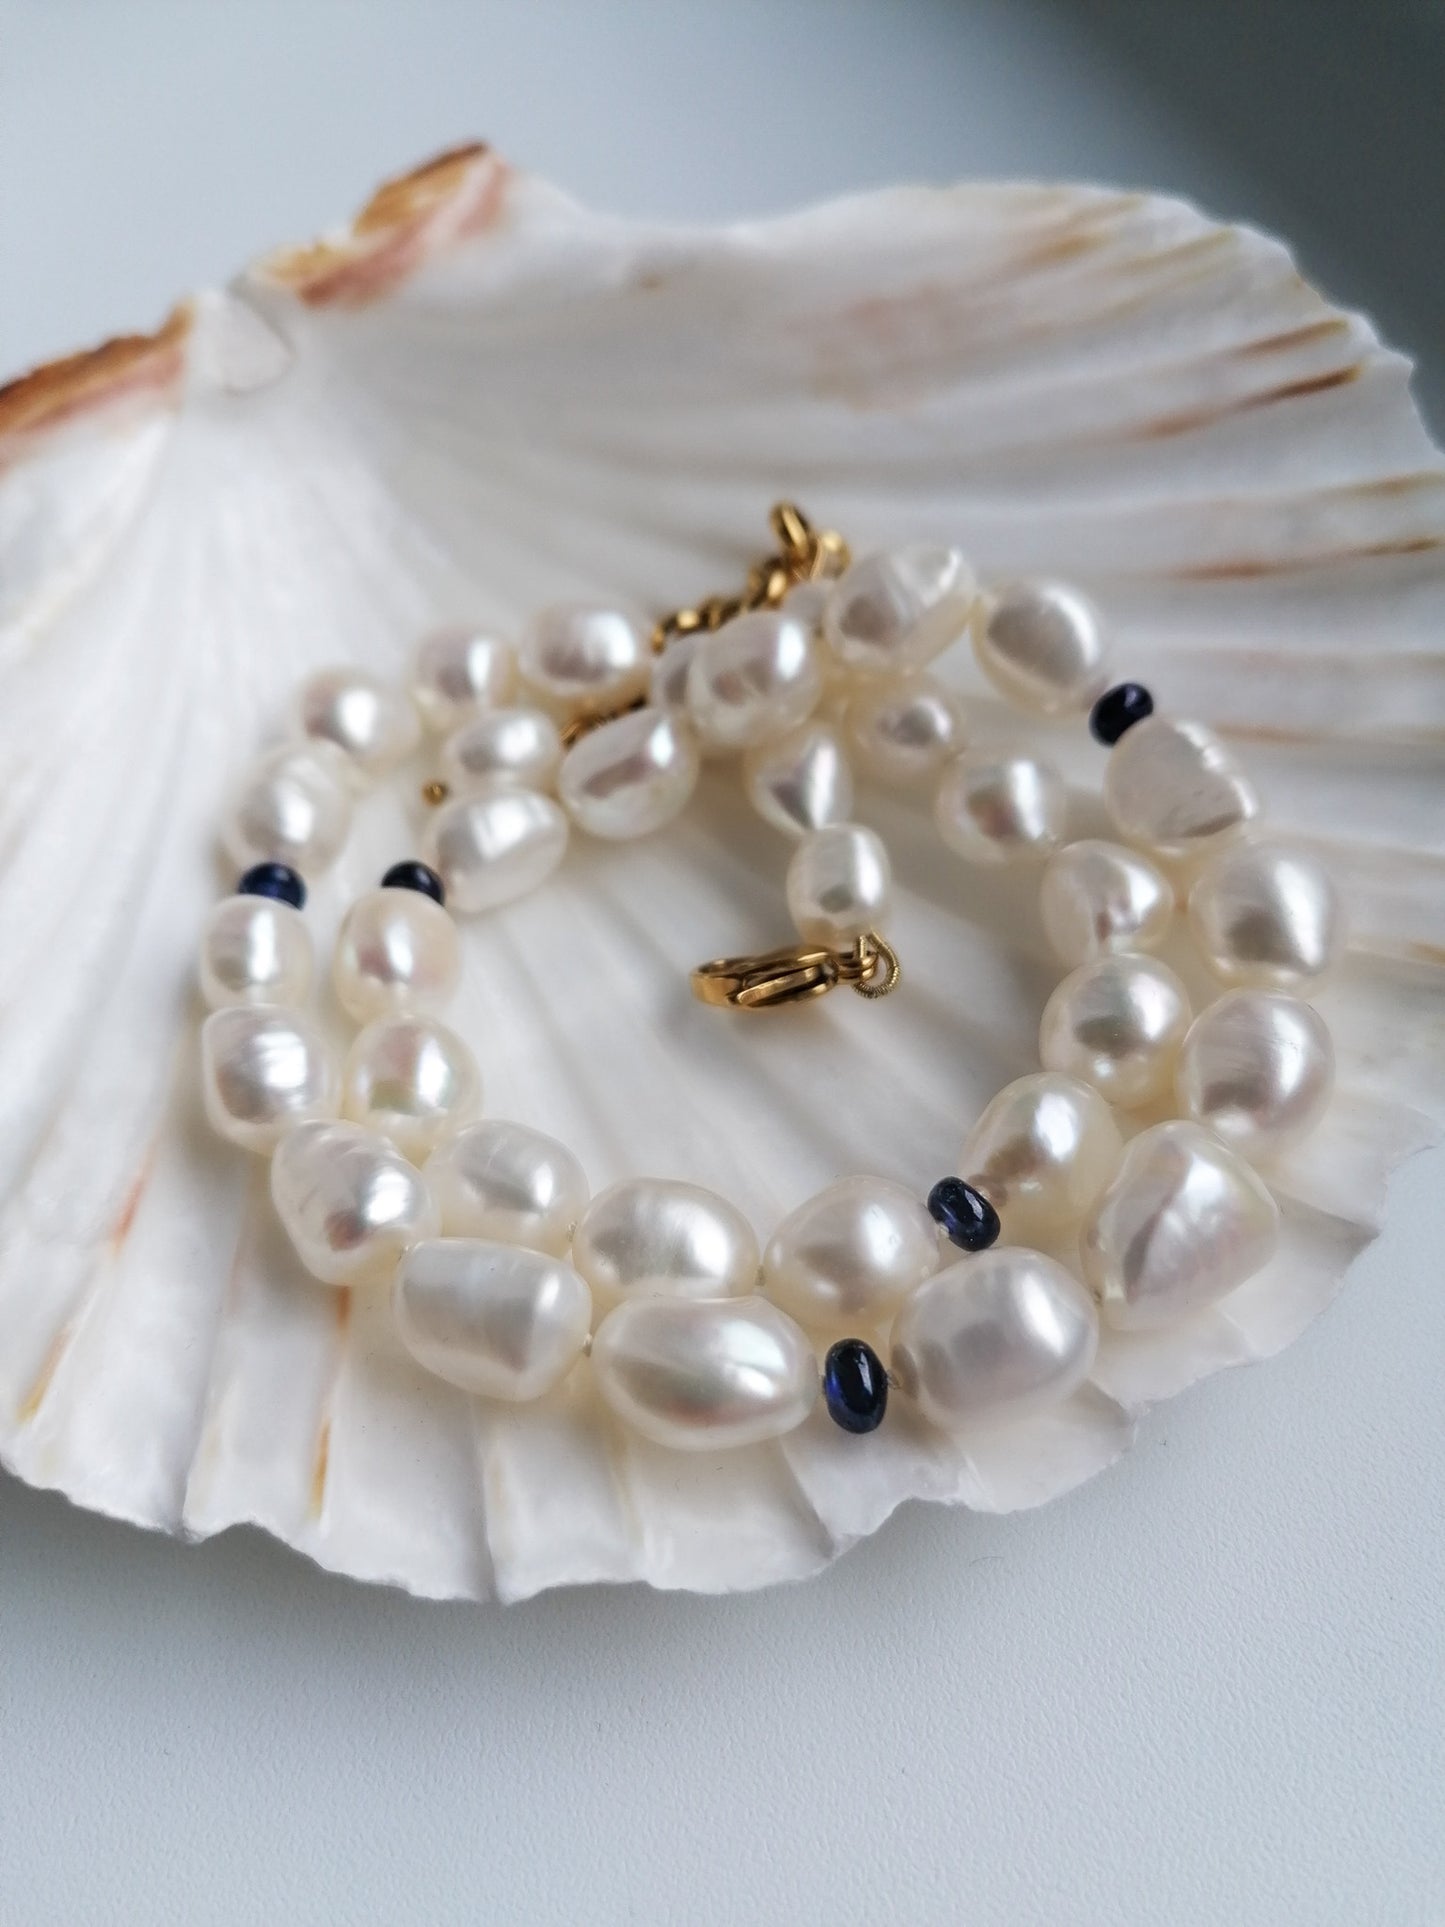 Pearl and sapphire necklace